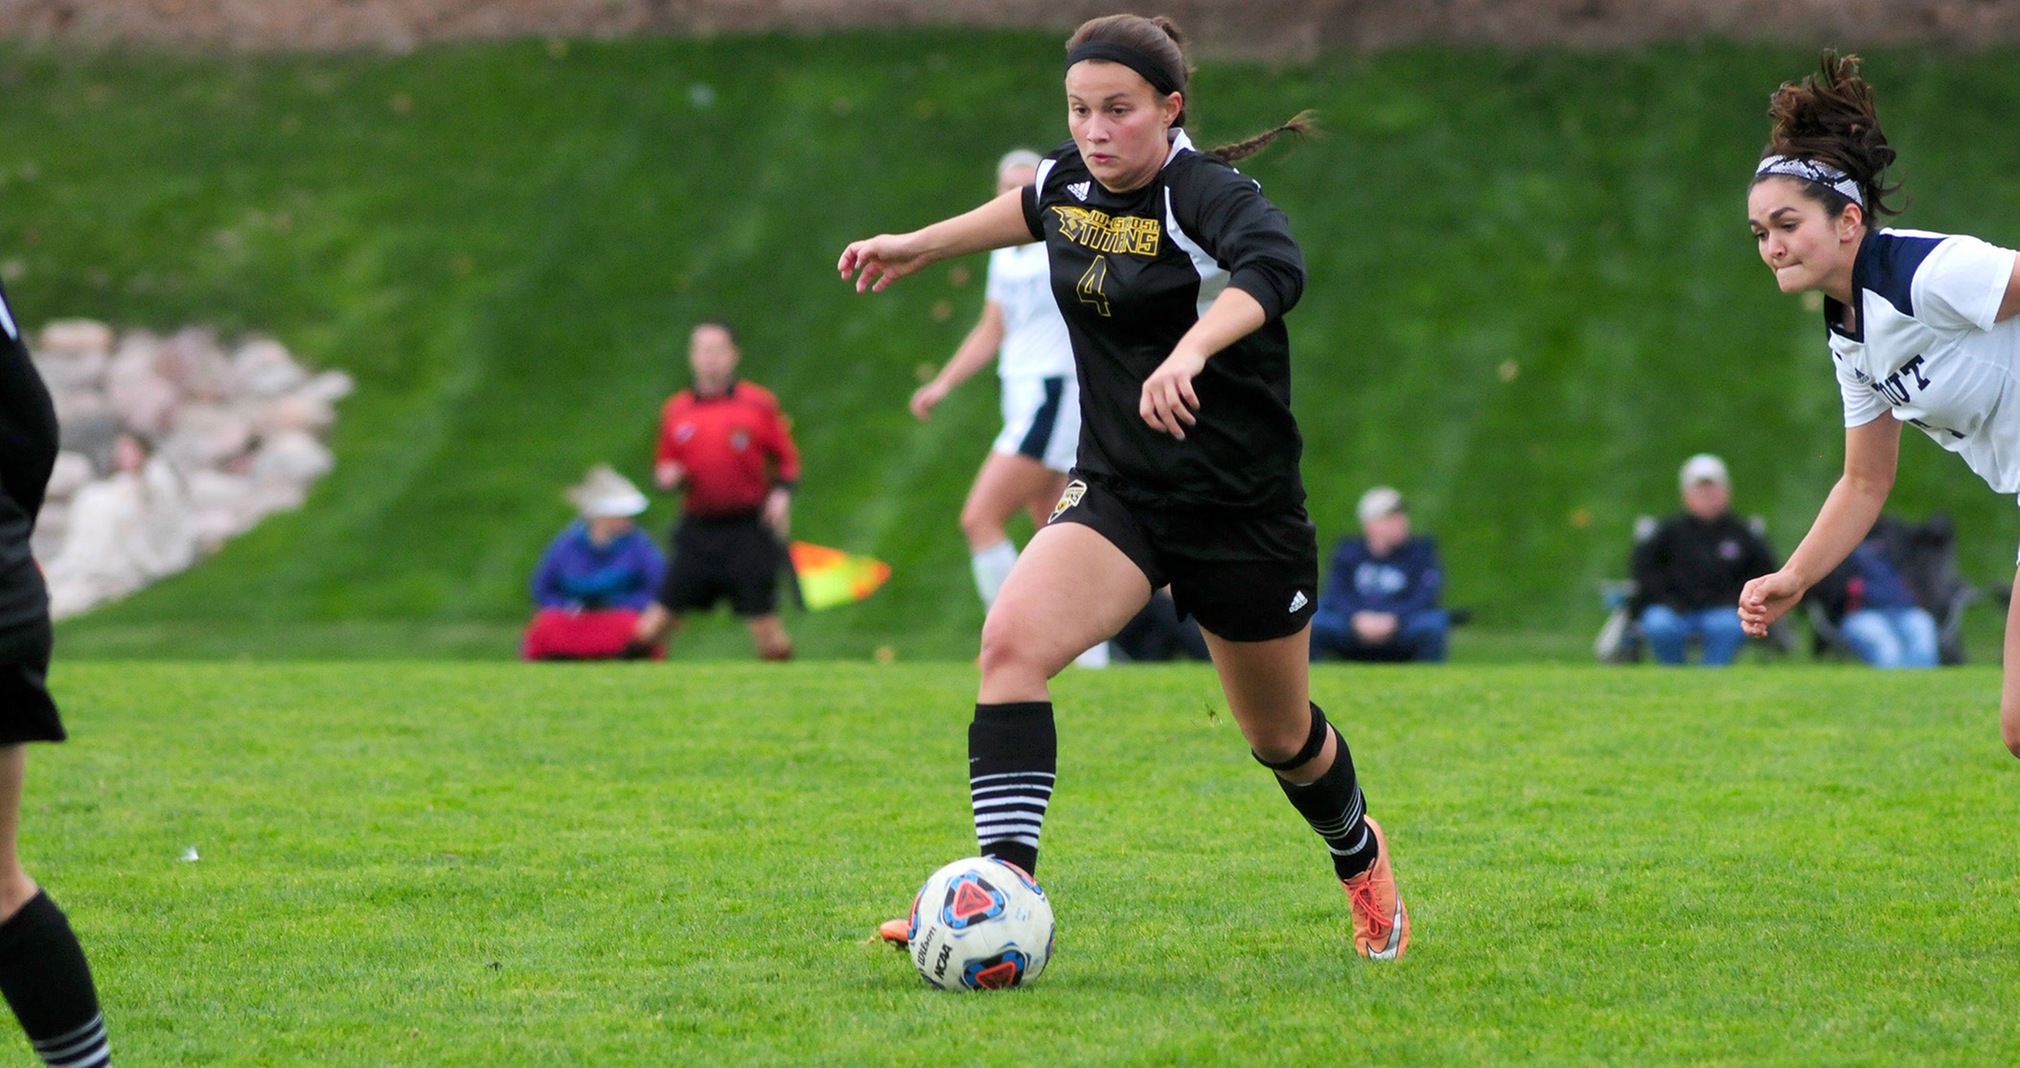 Toria Koch assisted on Ashley Baalke's goal during the 22nd minute of play.